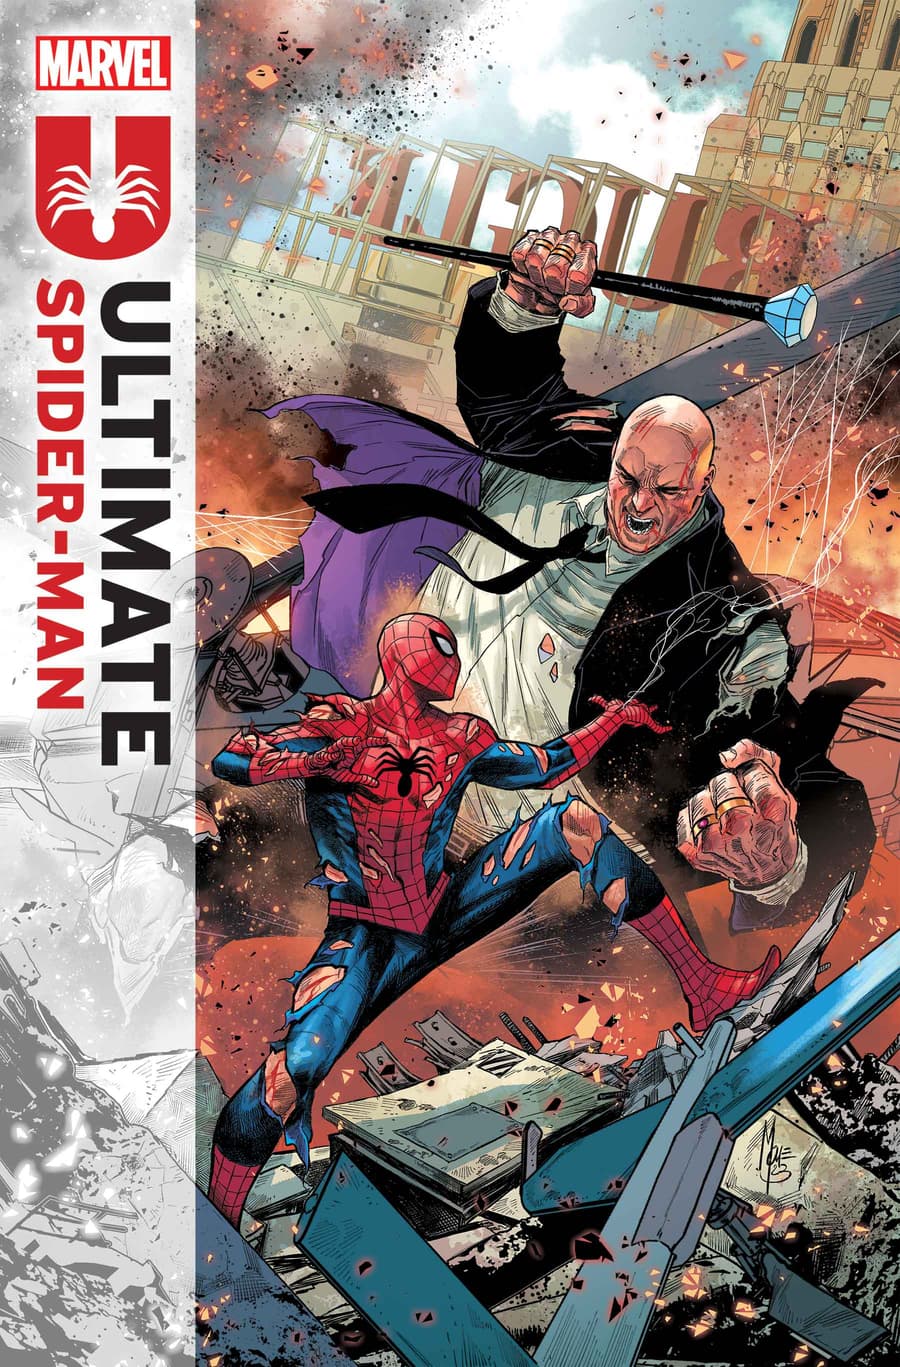 Jonathan Hickman's 'Ultimate SpiderMan' 1 Makes the Most Daring